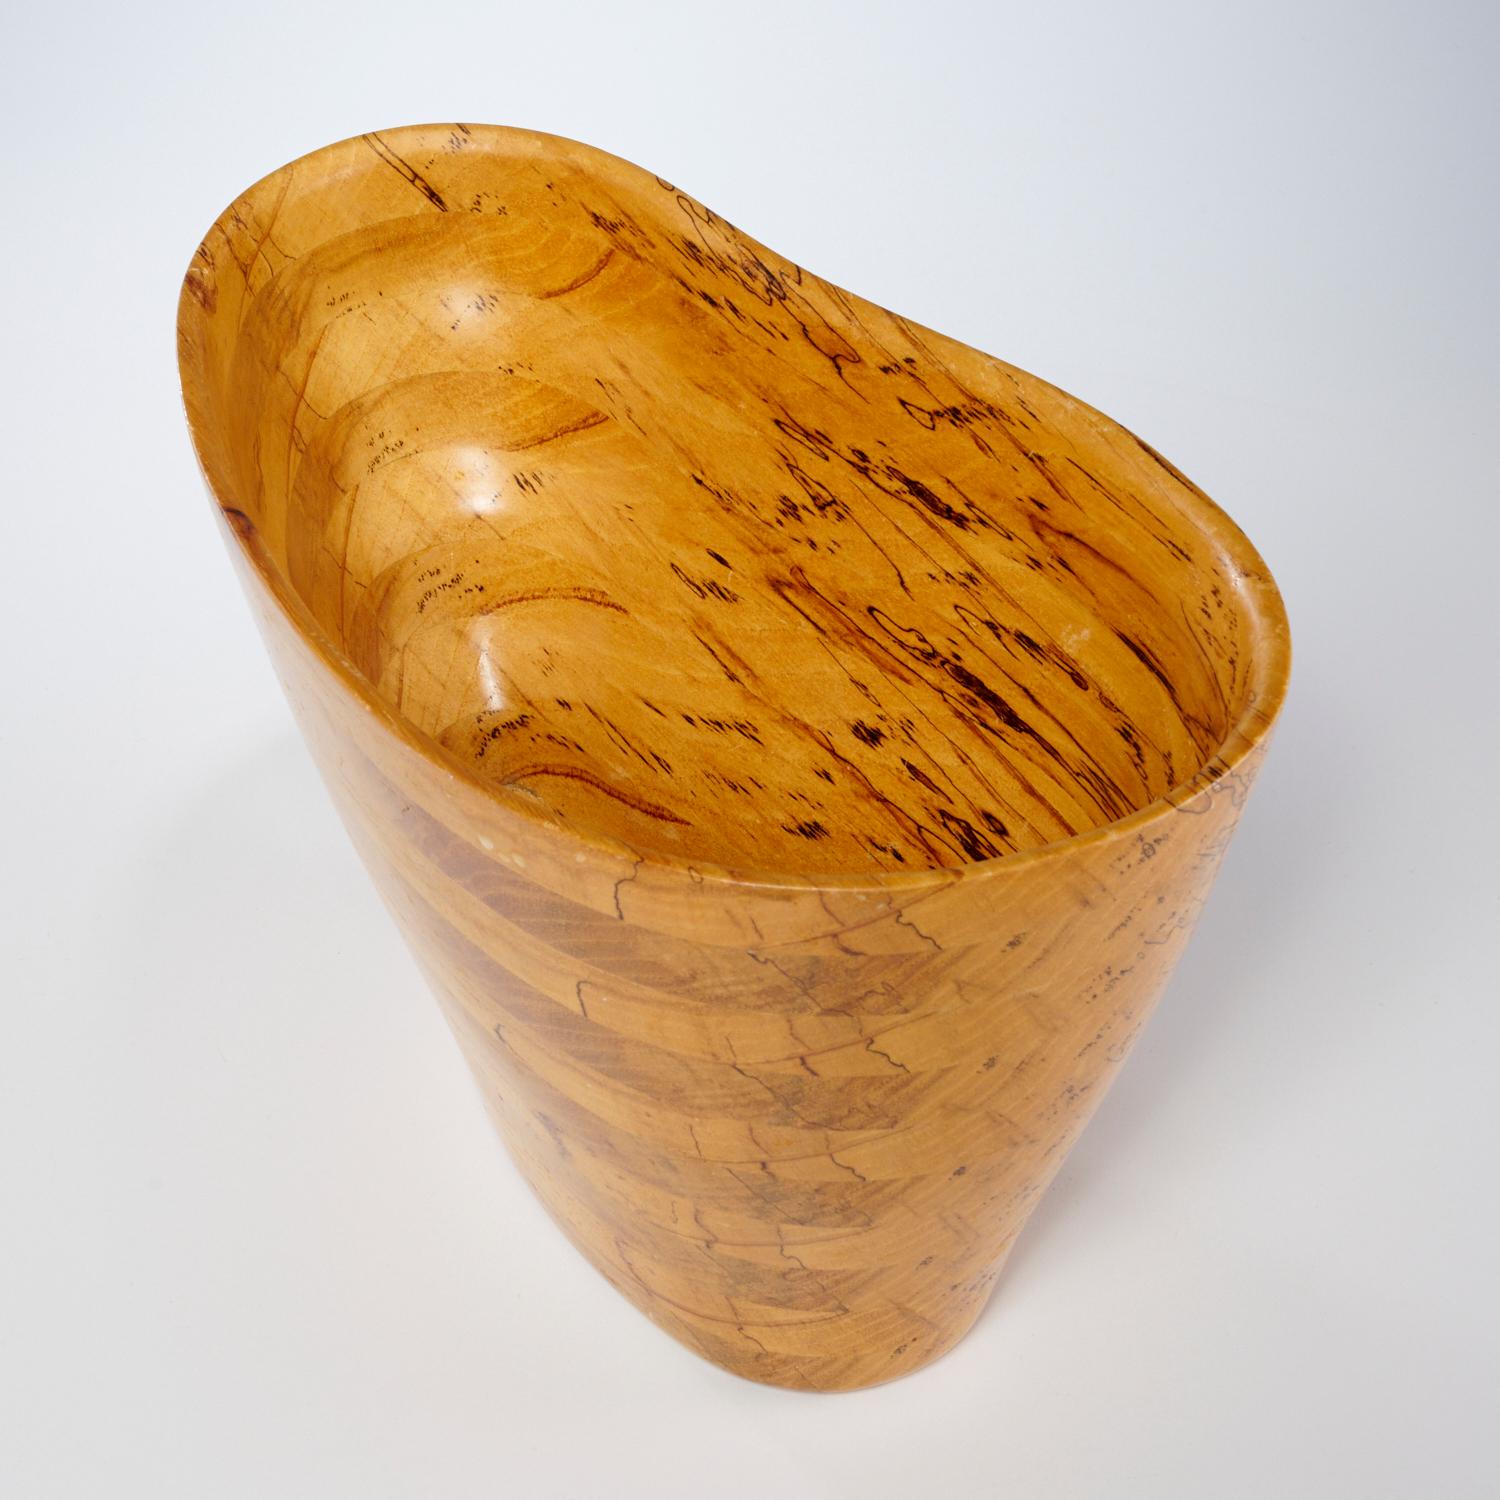 A Peter Petrochko amorphic bowl of layered hickory, signed and dated 2002 underneath. From the 